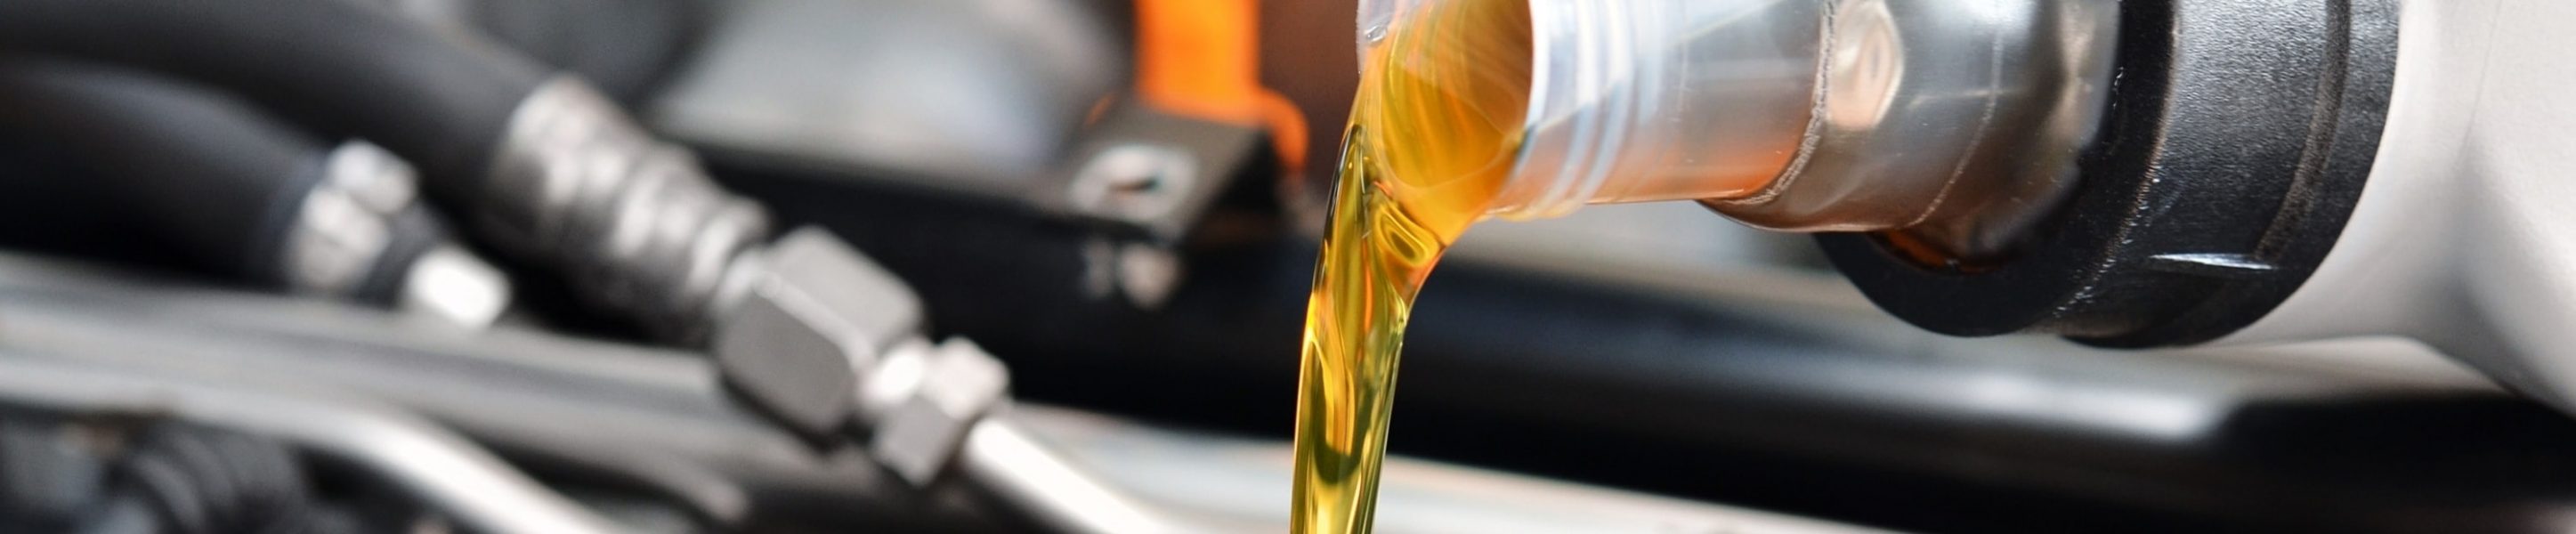 Oil being poured into car engine